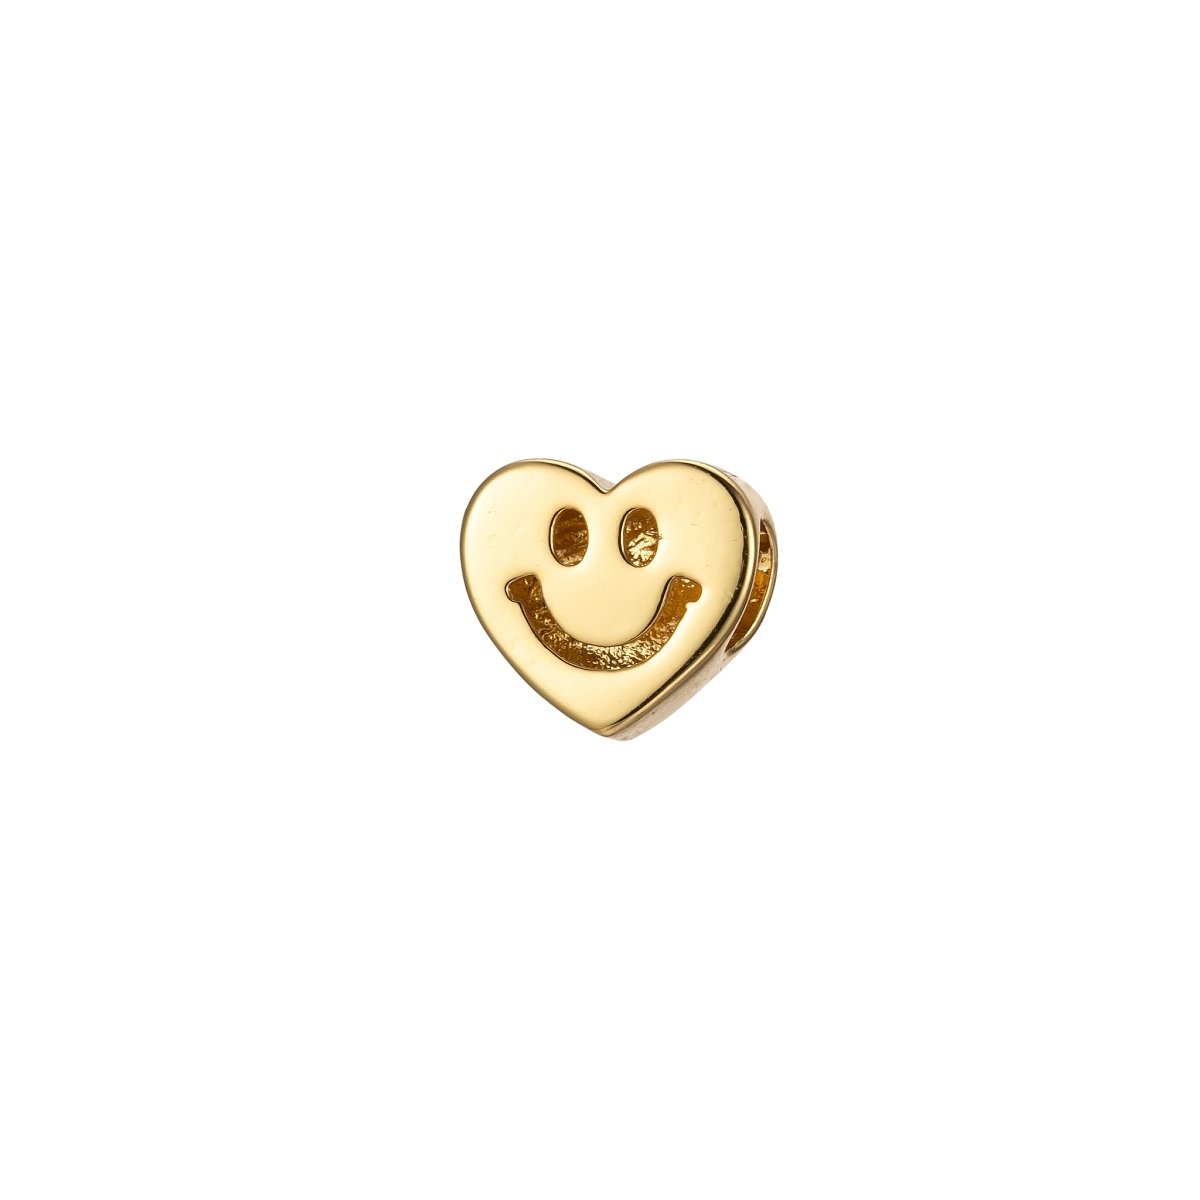 Tiny Heart Beads, Gold Smiley Face Heart Spacer Beads Happy Face Jewelry B-530 - DLUXCA